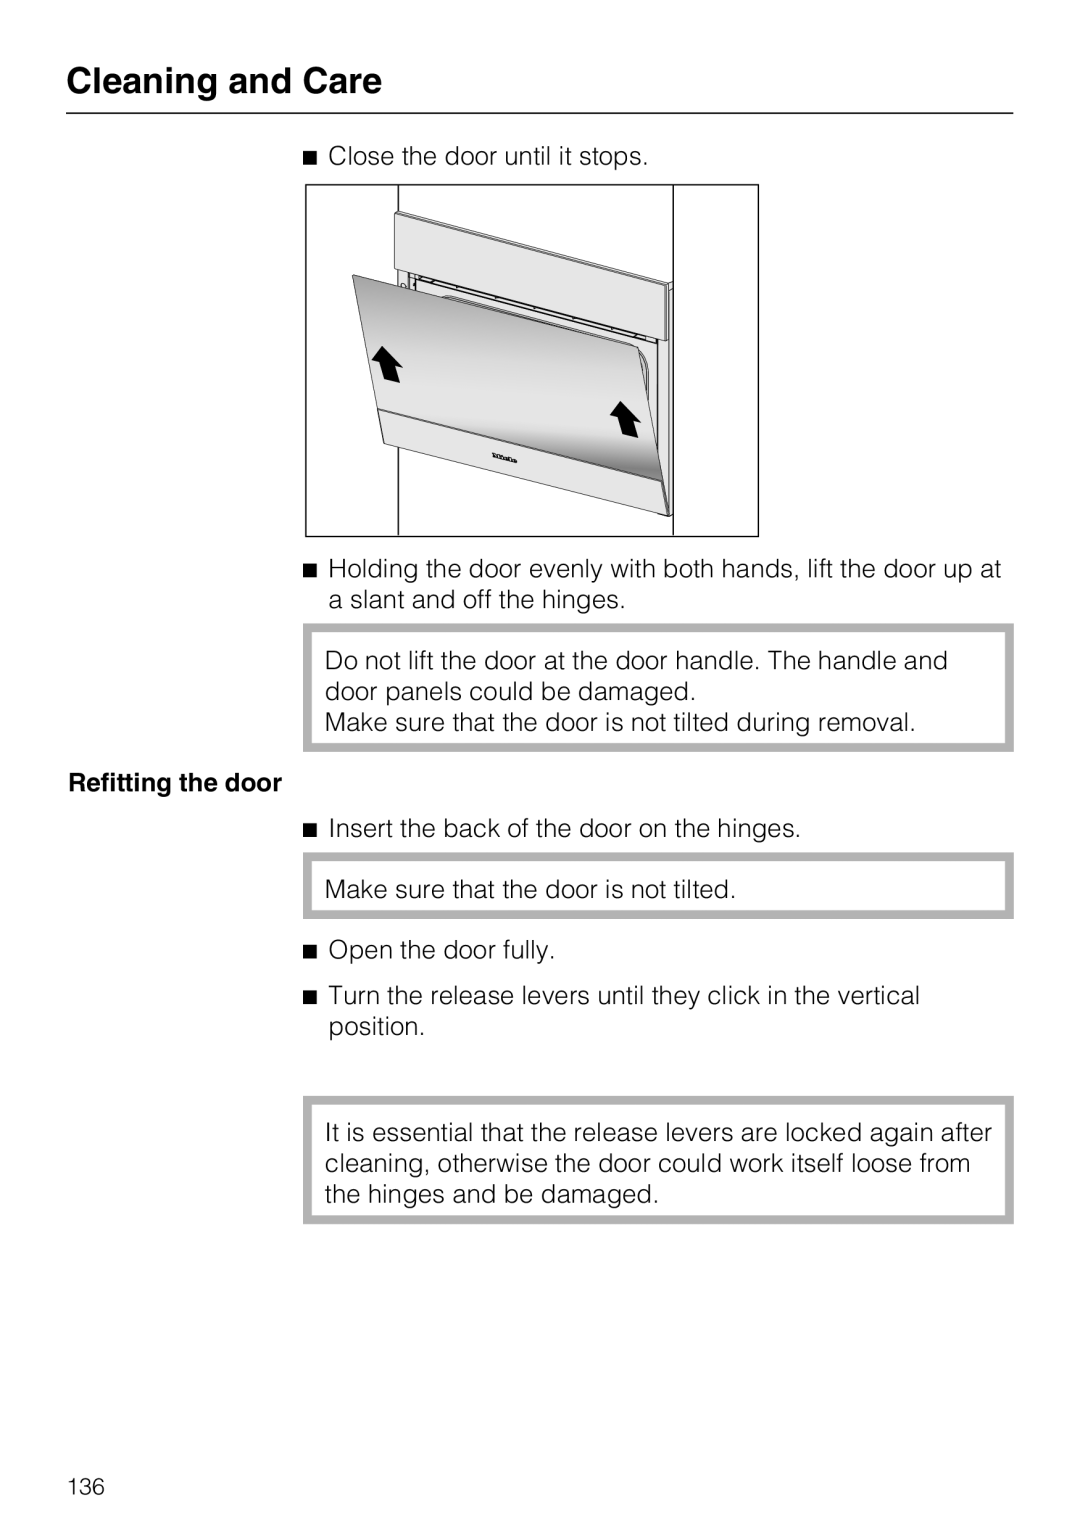 Miele 09 855 050 installation instructions Cleaning and Care, Refitting the door 